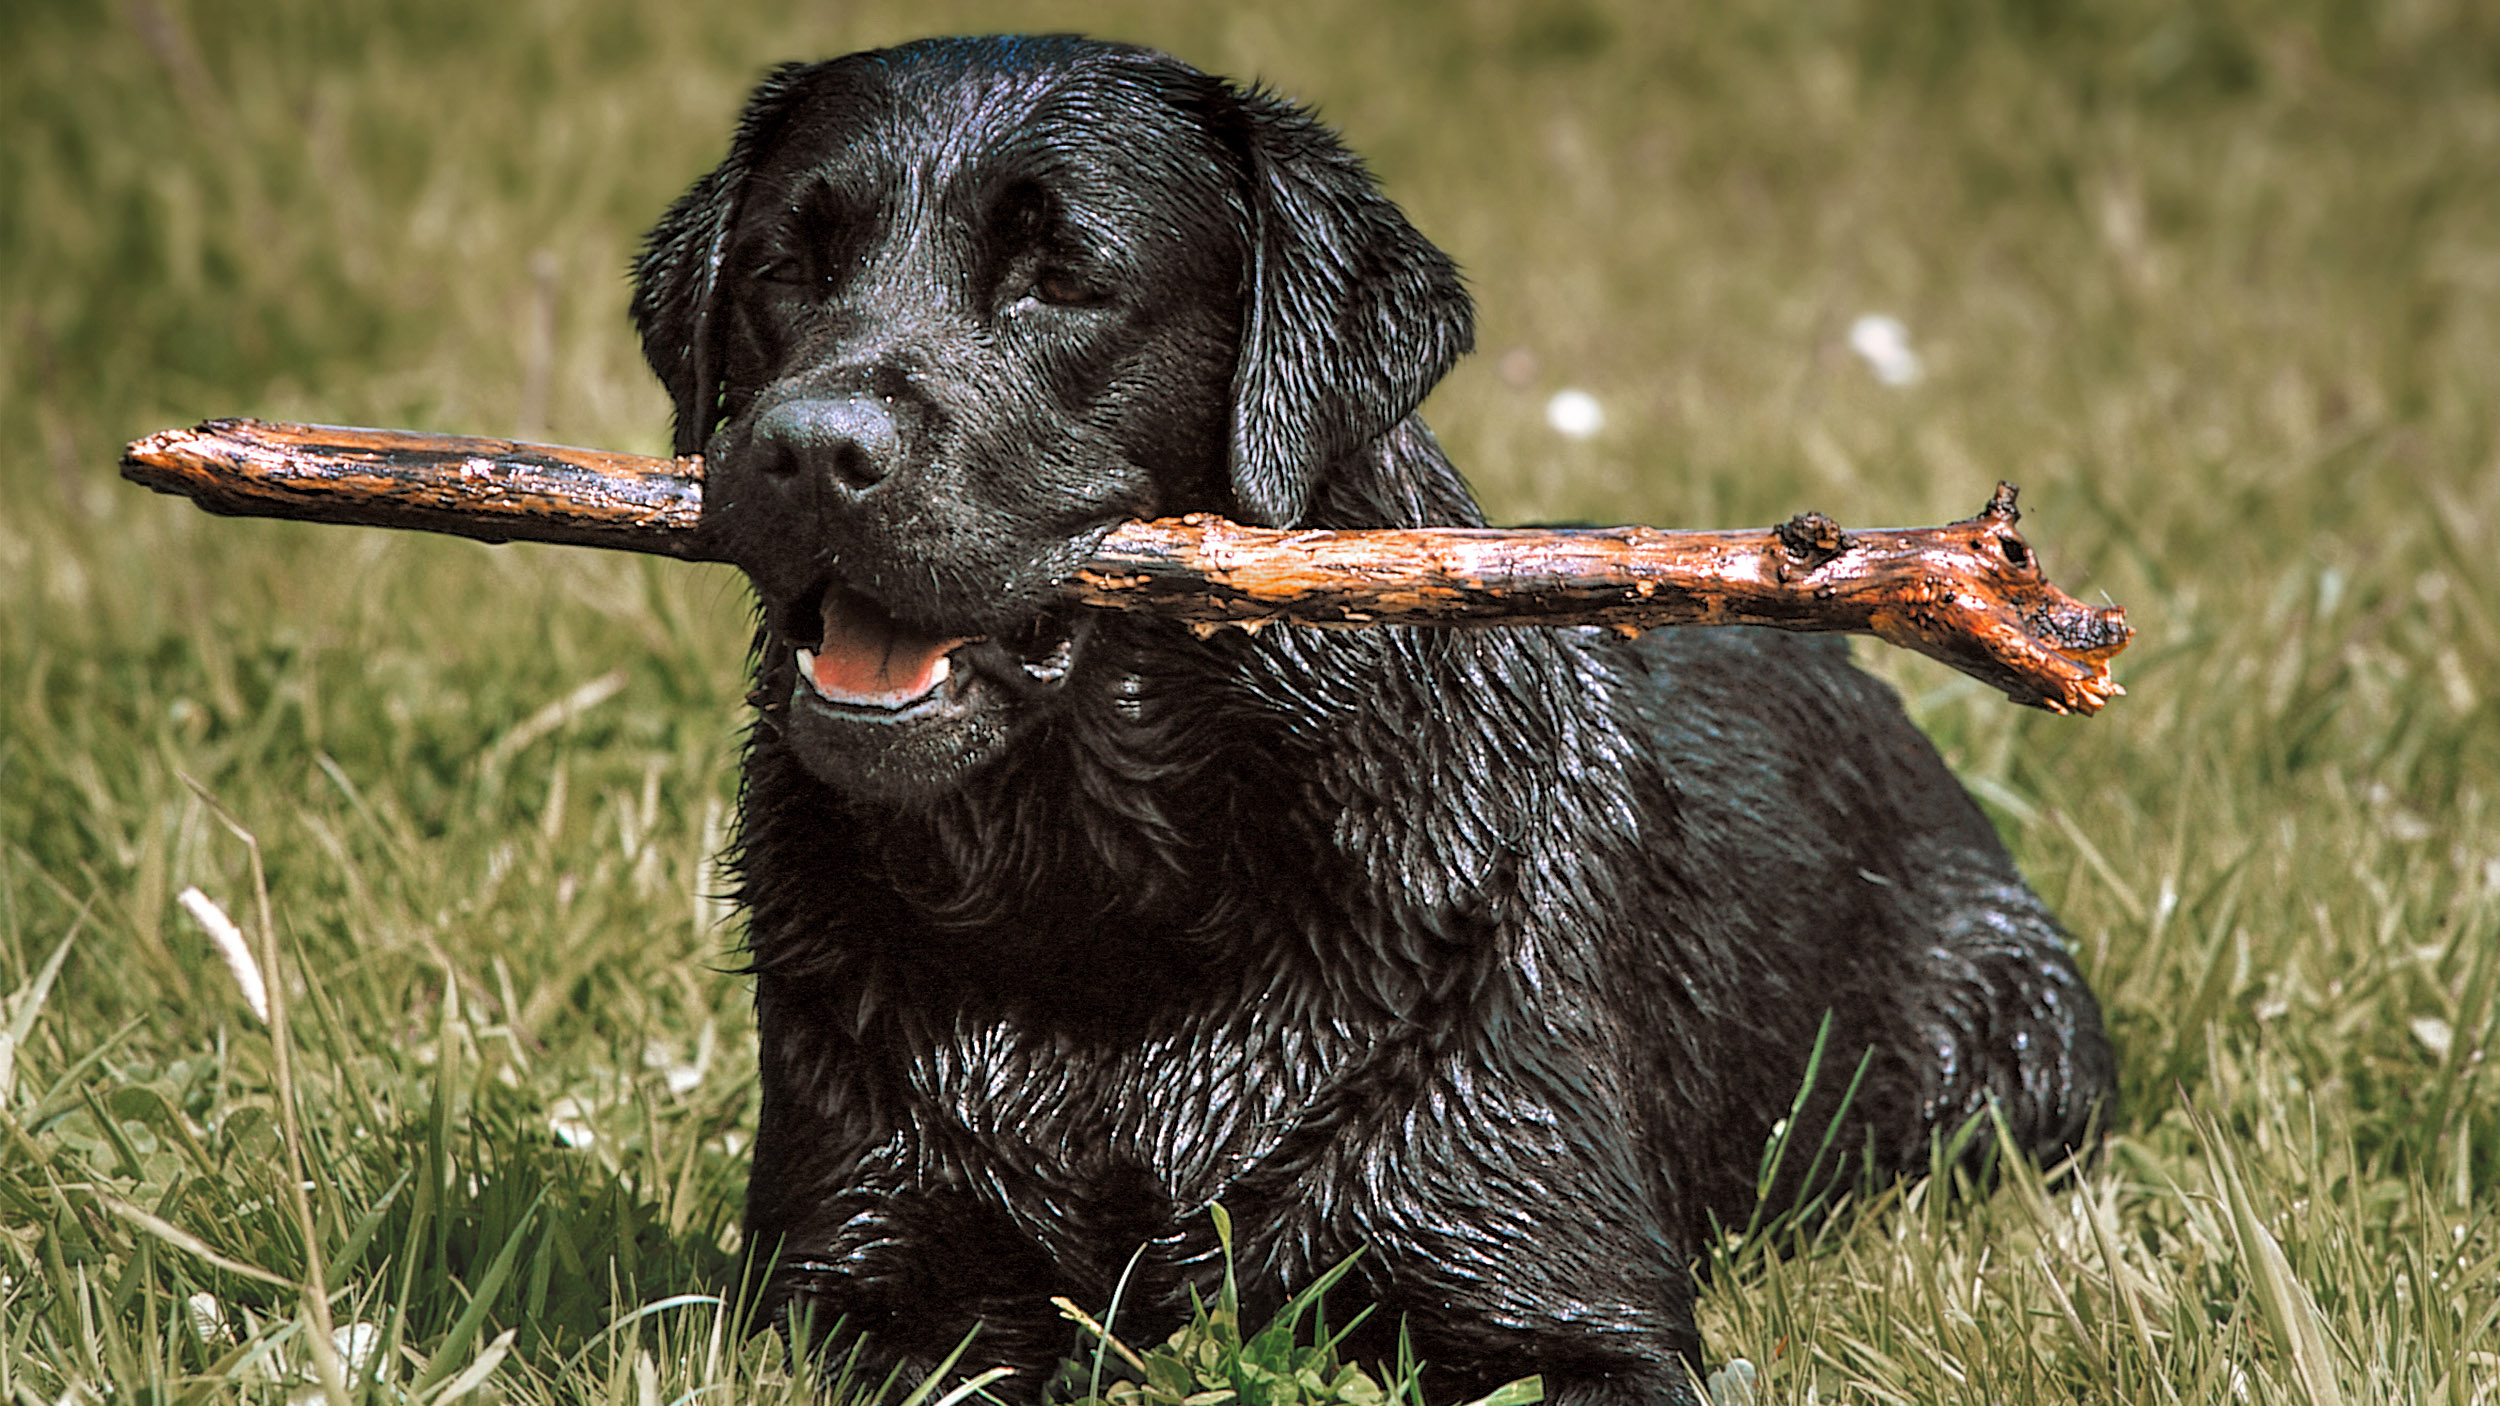 Labrador Retriever adult lying down in grass with a stick